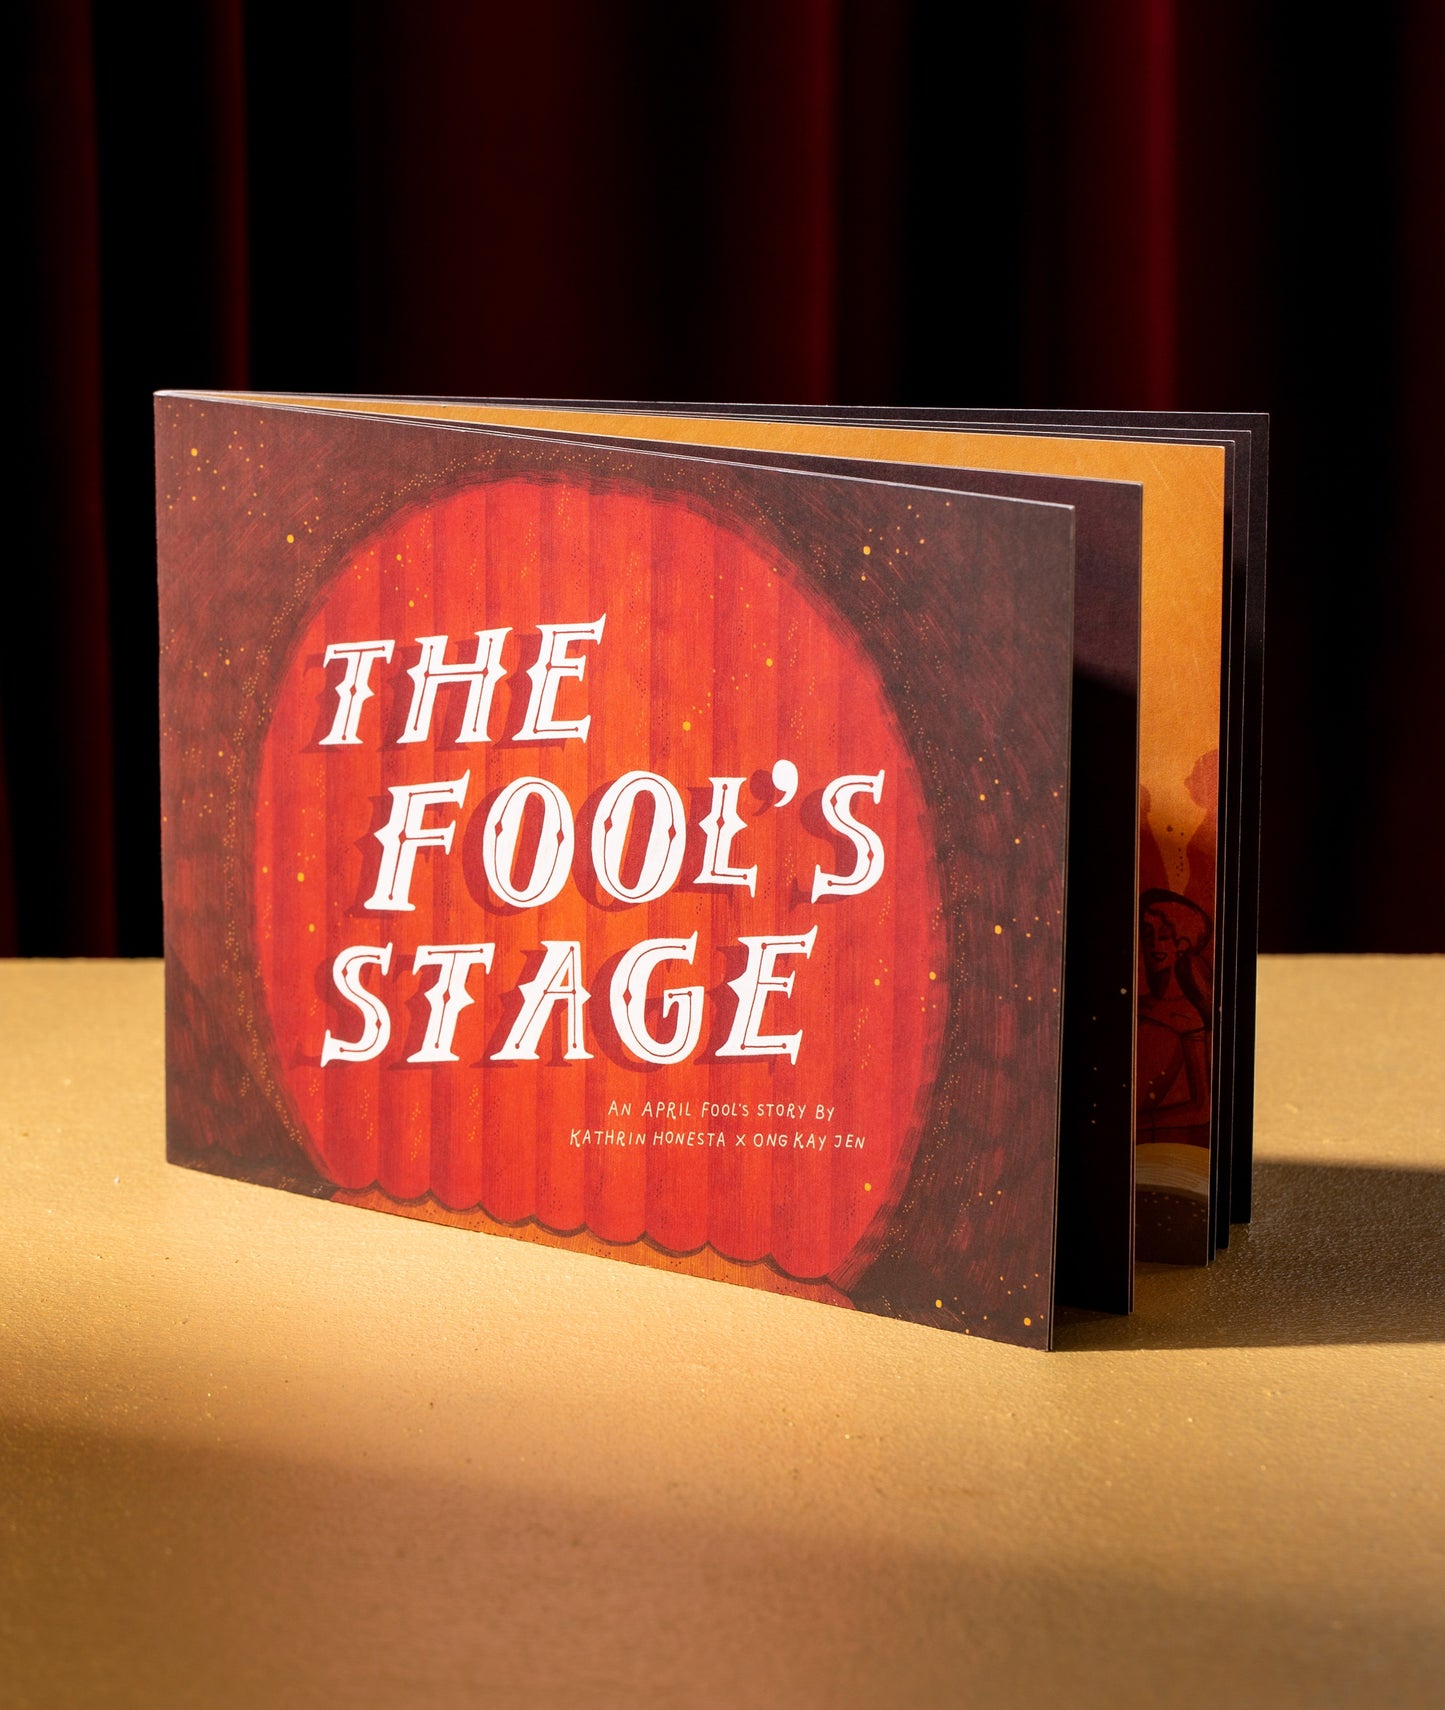 THE FOOL'S STAGE